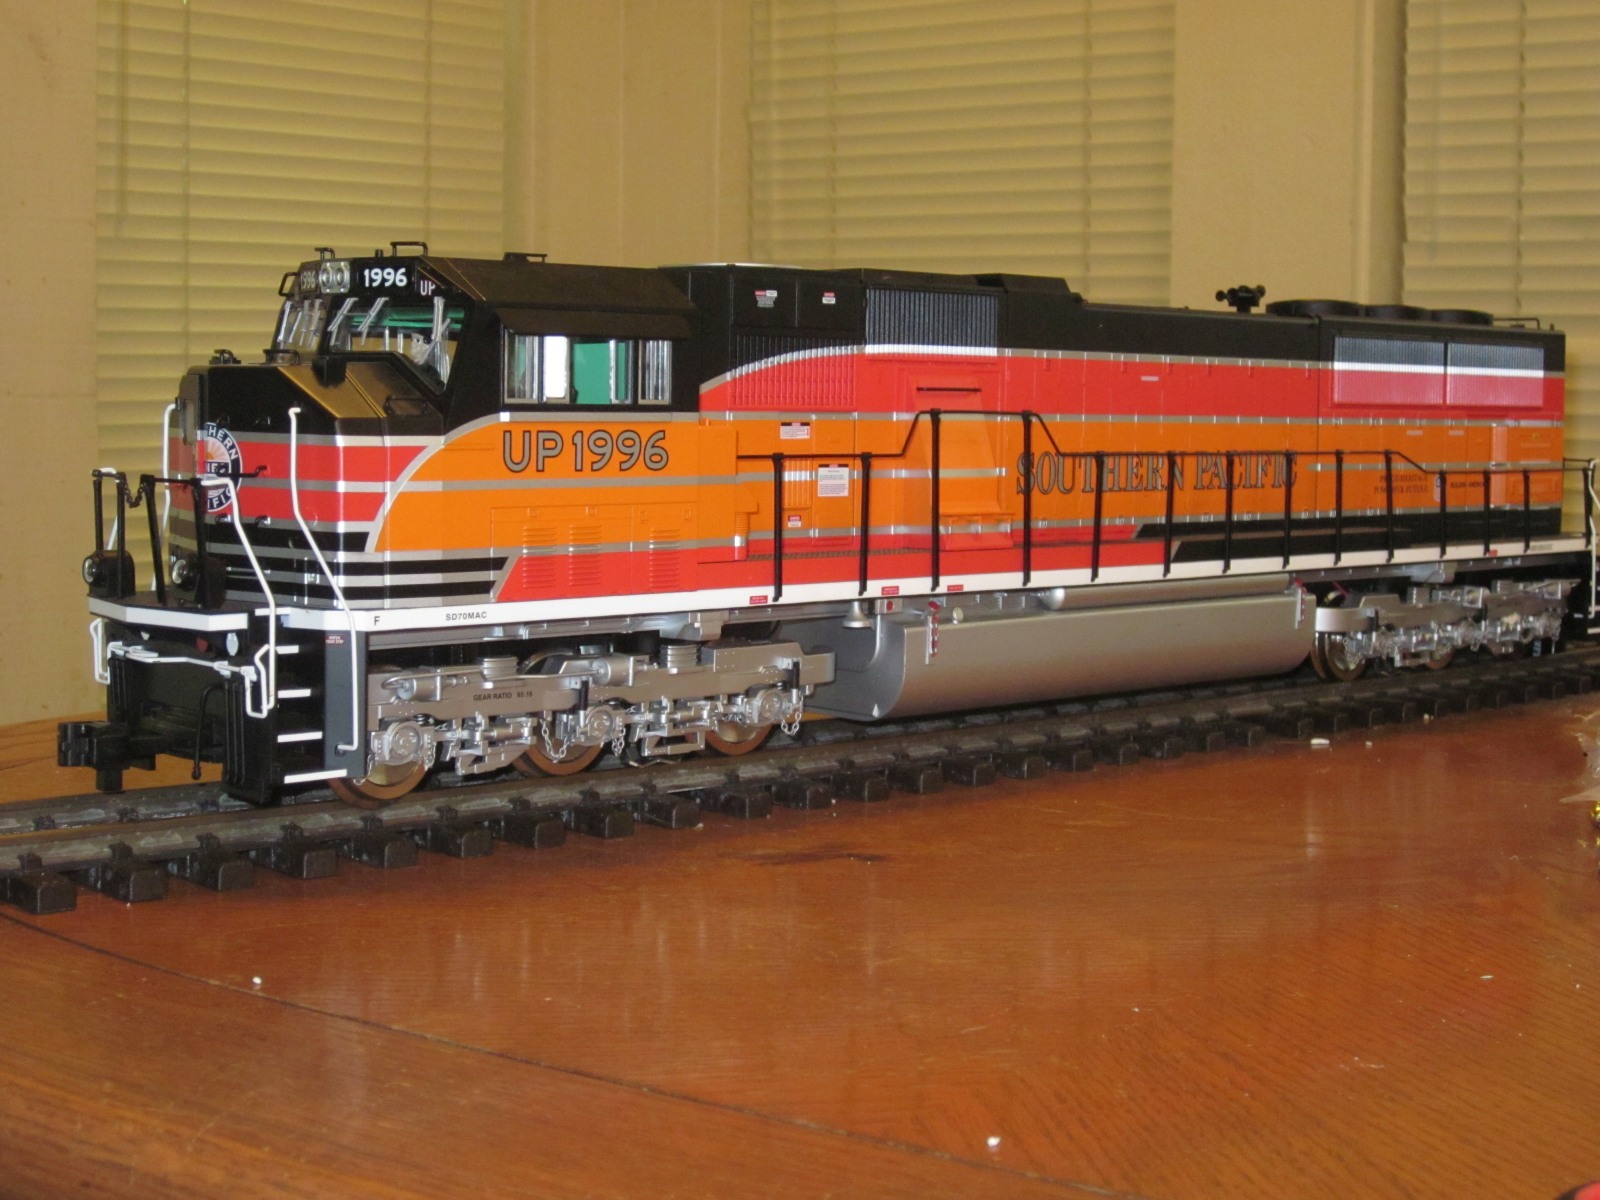 R22621 Union Pacific (Southern Pacific Heritage) UP 1996